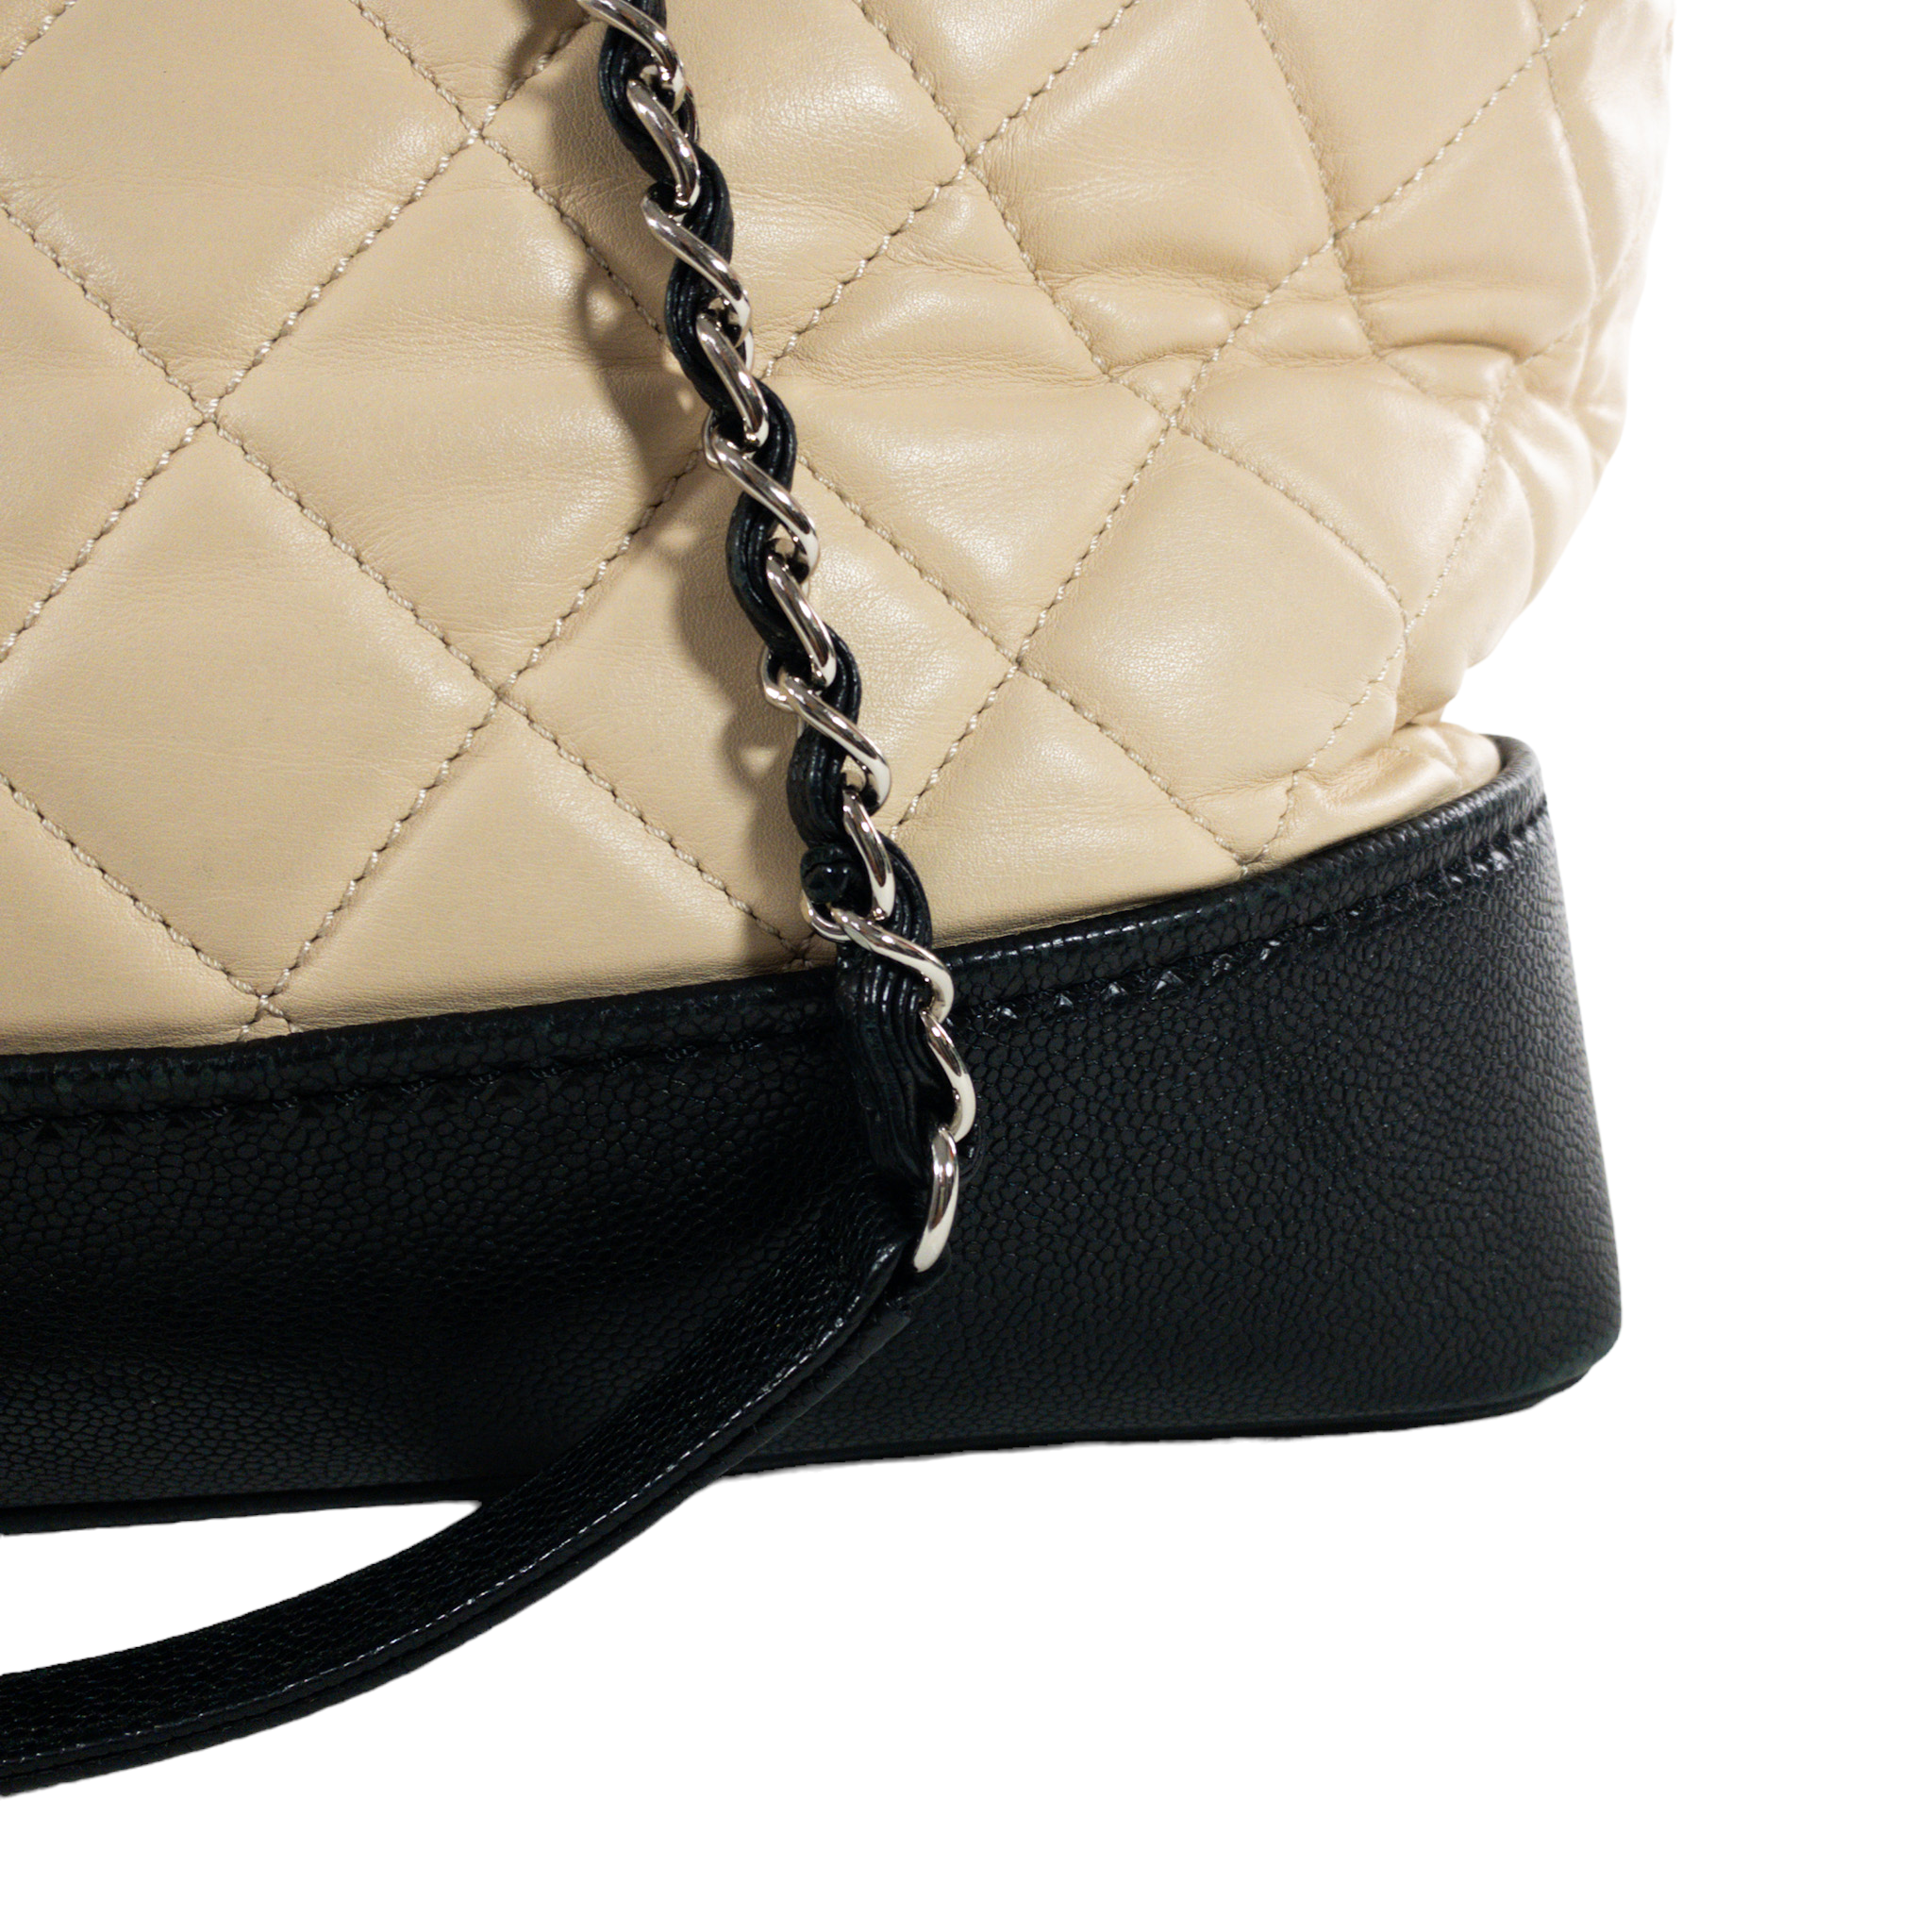 Chanel Beige/Black Quilted Leather Bi-Coco Shopping Tote Bag